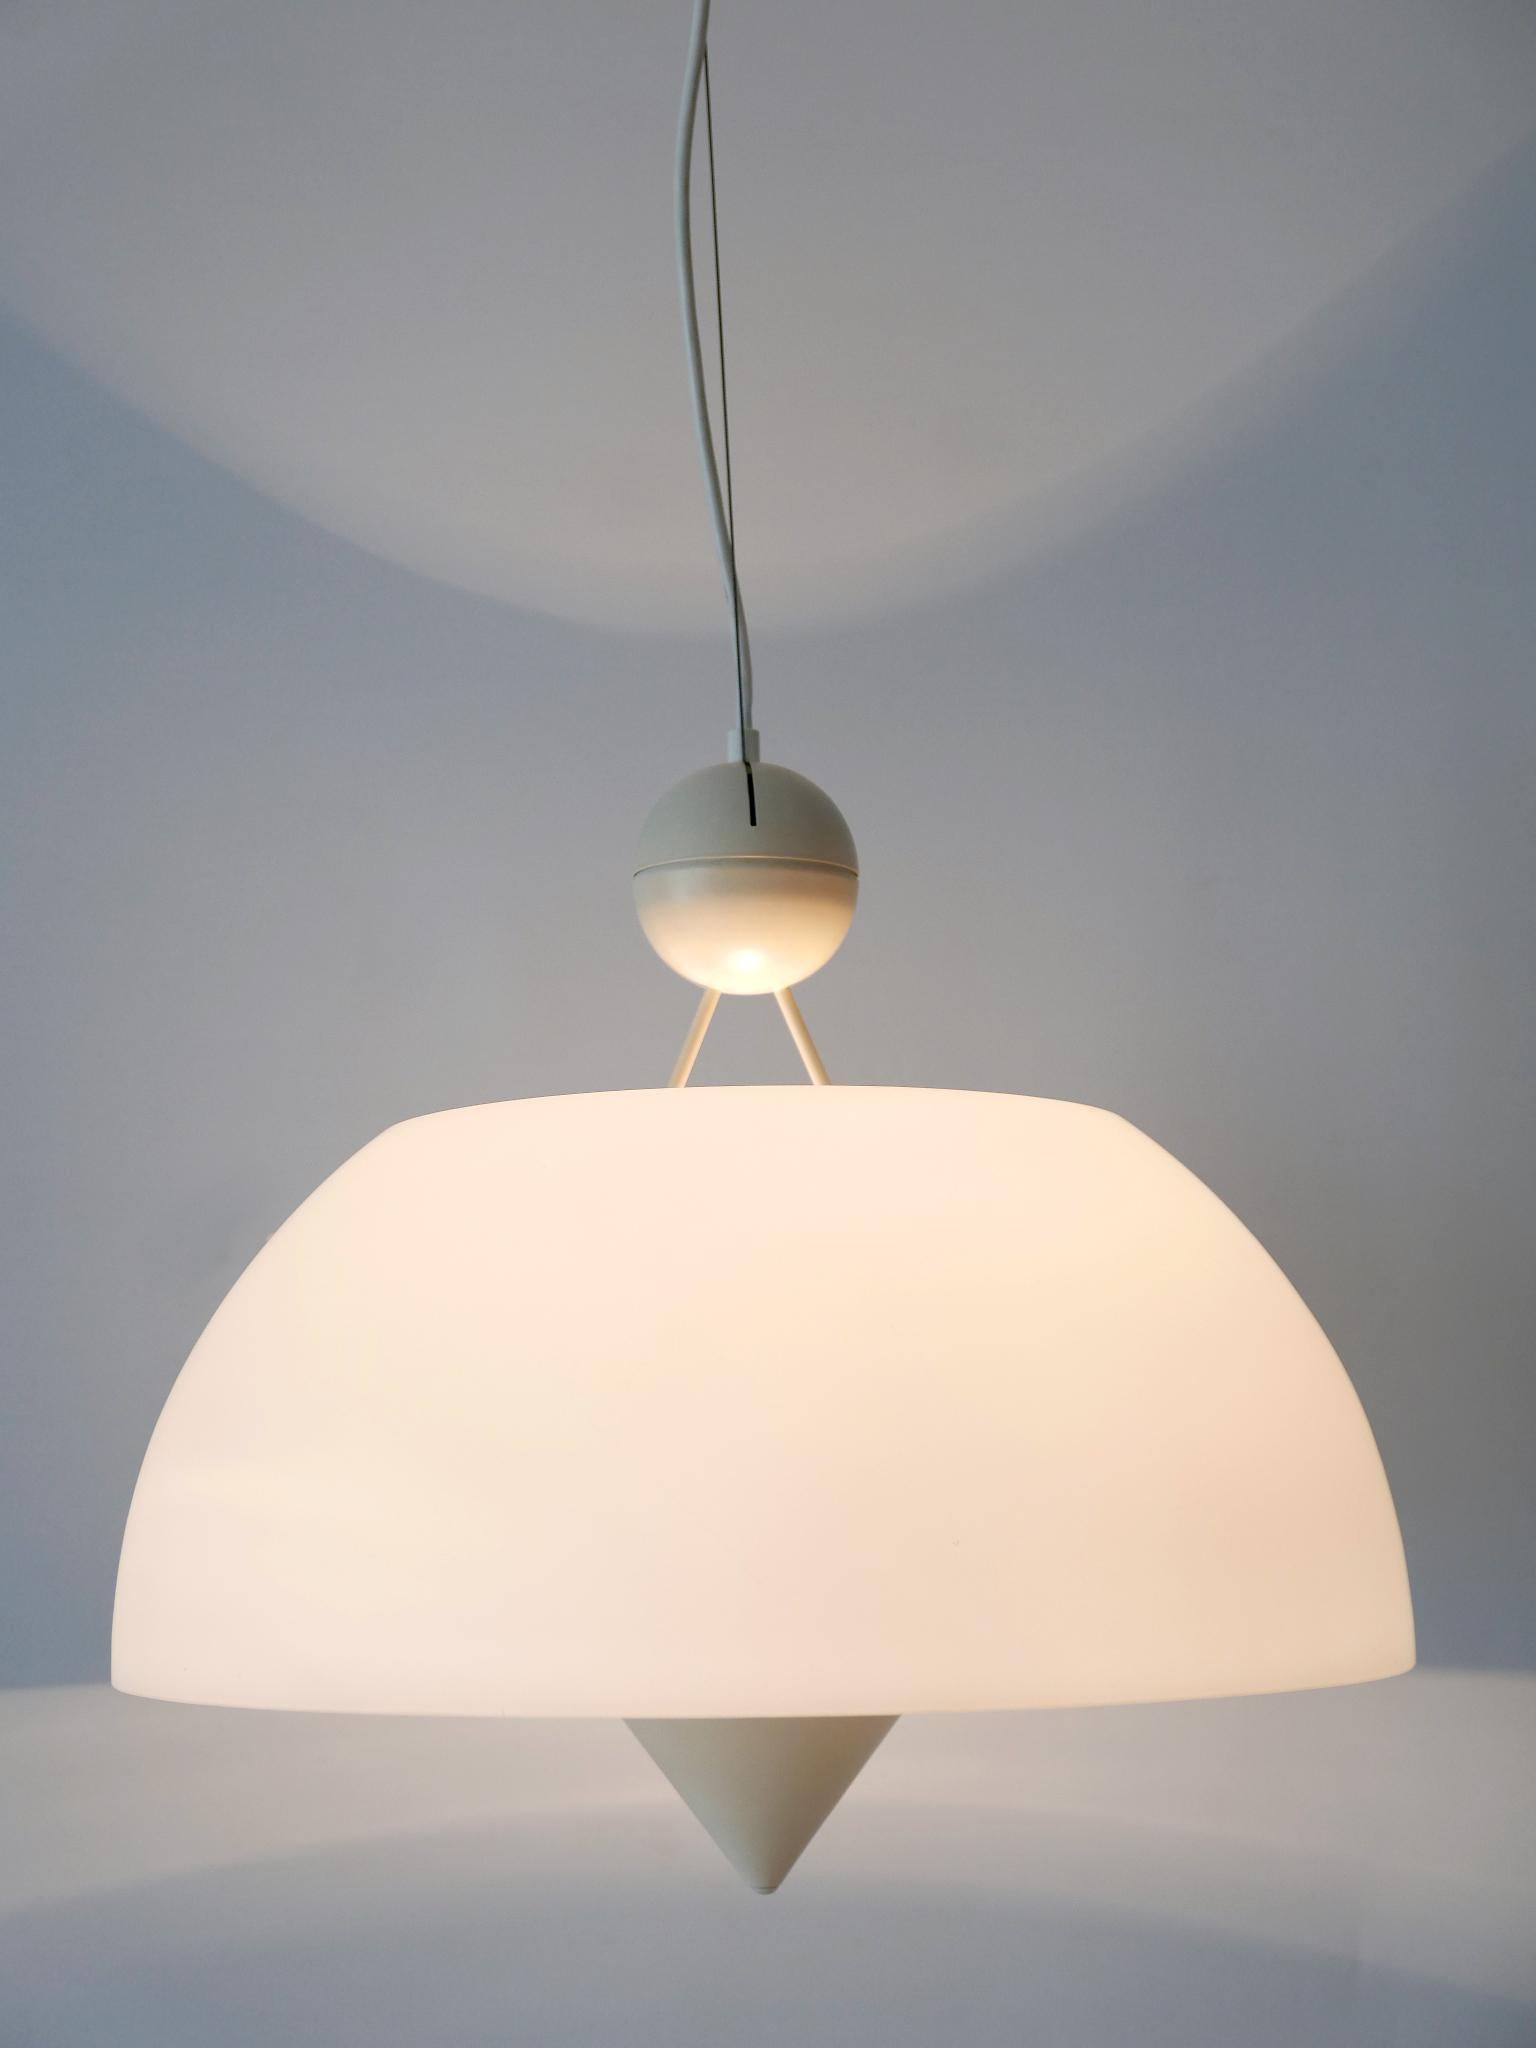 Extremely rare and very elegant Mid-Century Modern pendant lamp or hanging light. Designed probably by Vico Magistretti (attr.) for Oluce (attr.), Italy 1970s

Executed in opaline and metal, the pendant lamp comes with 1 x E27 / E26 Edison screw fit